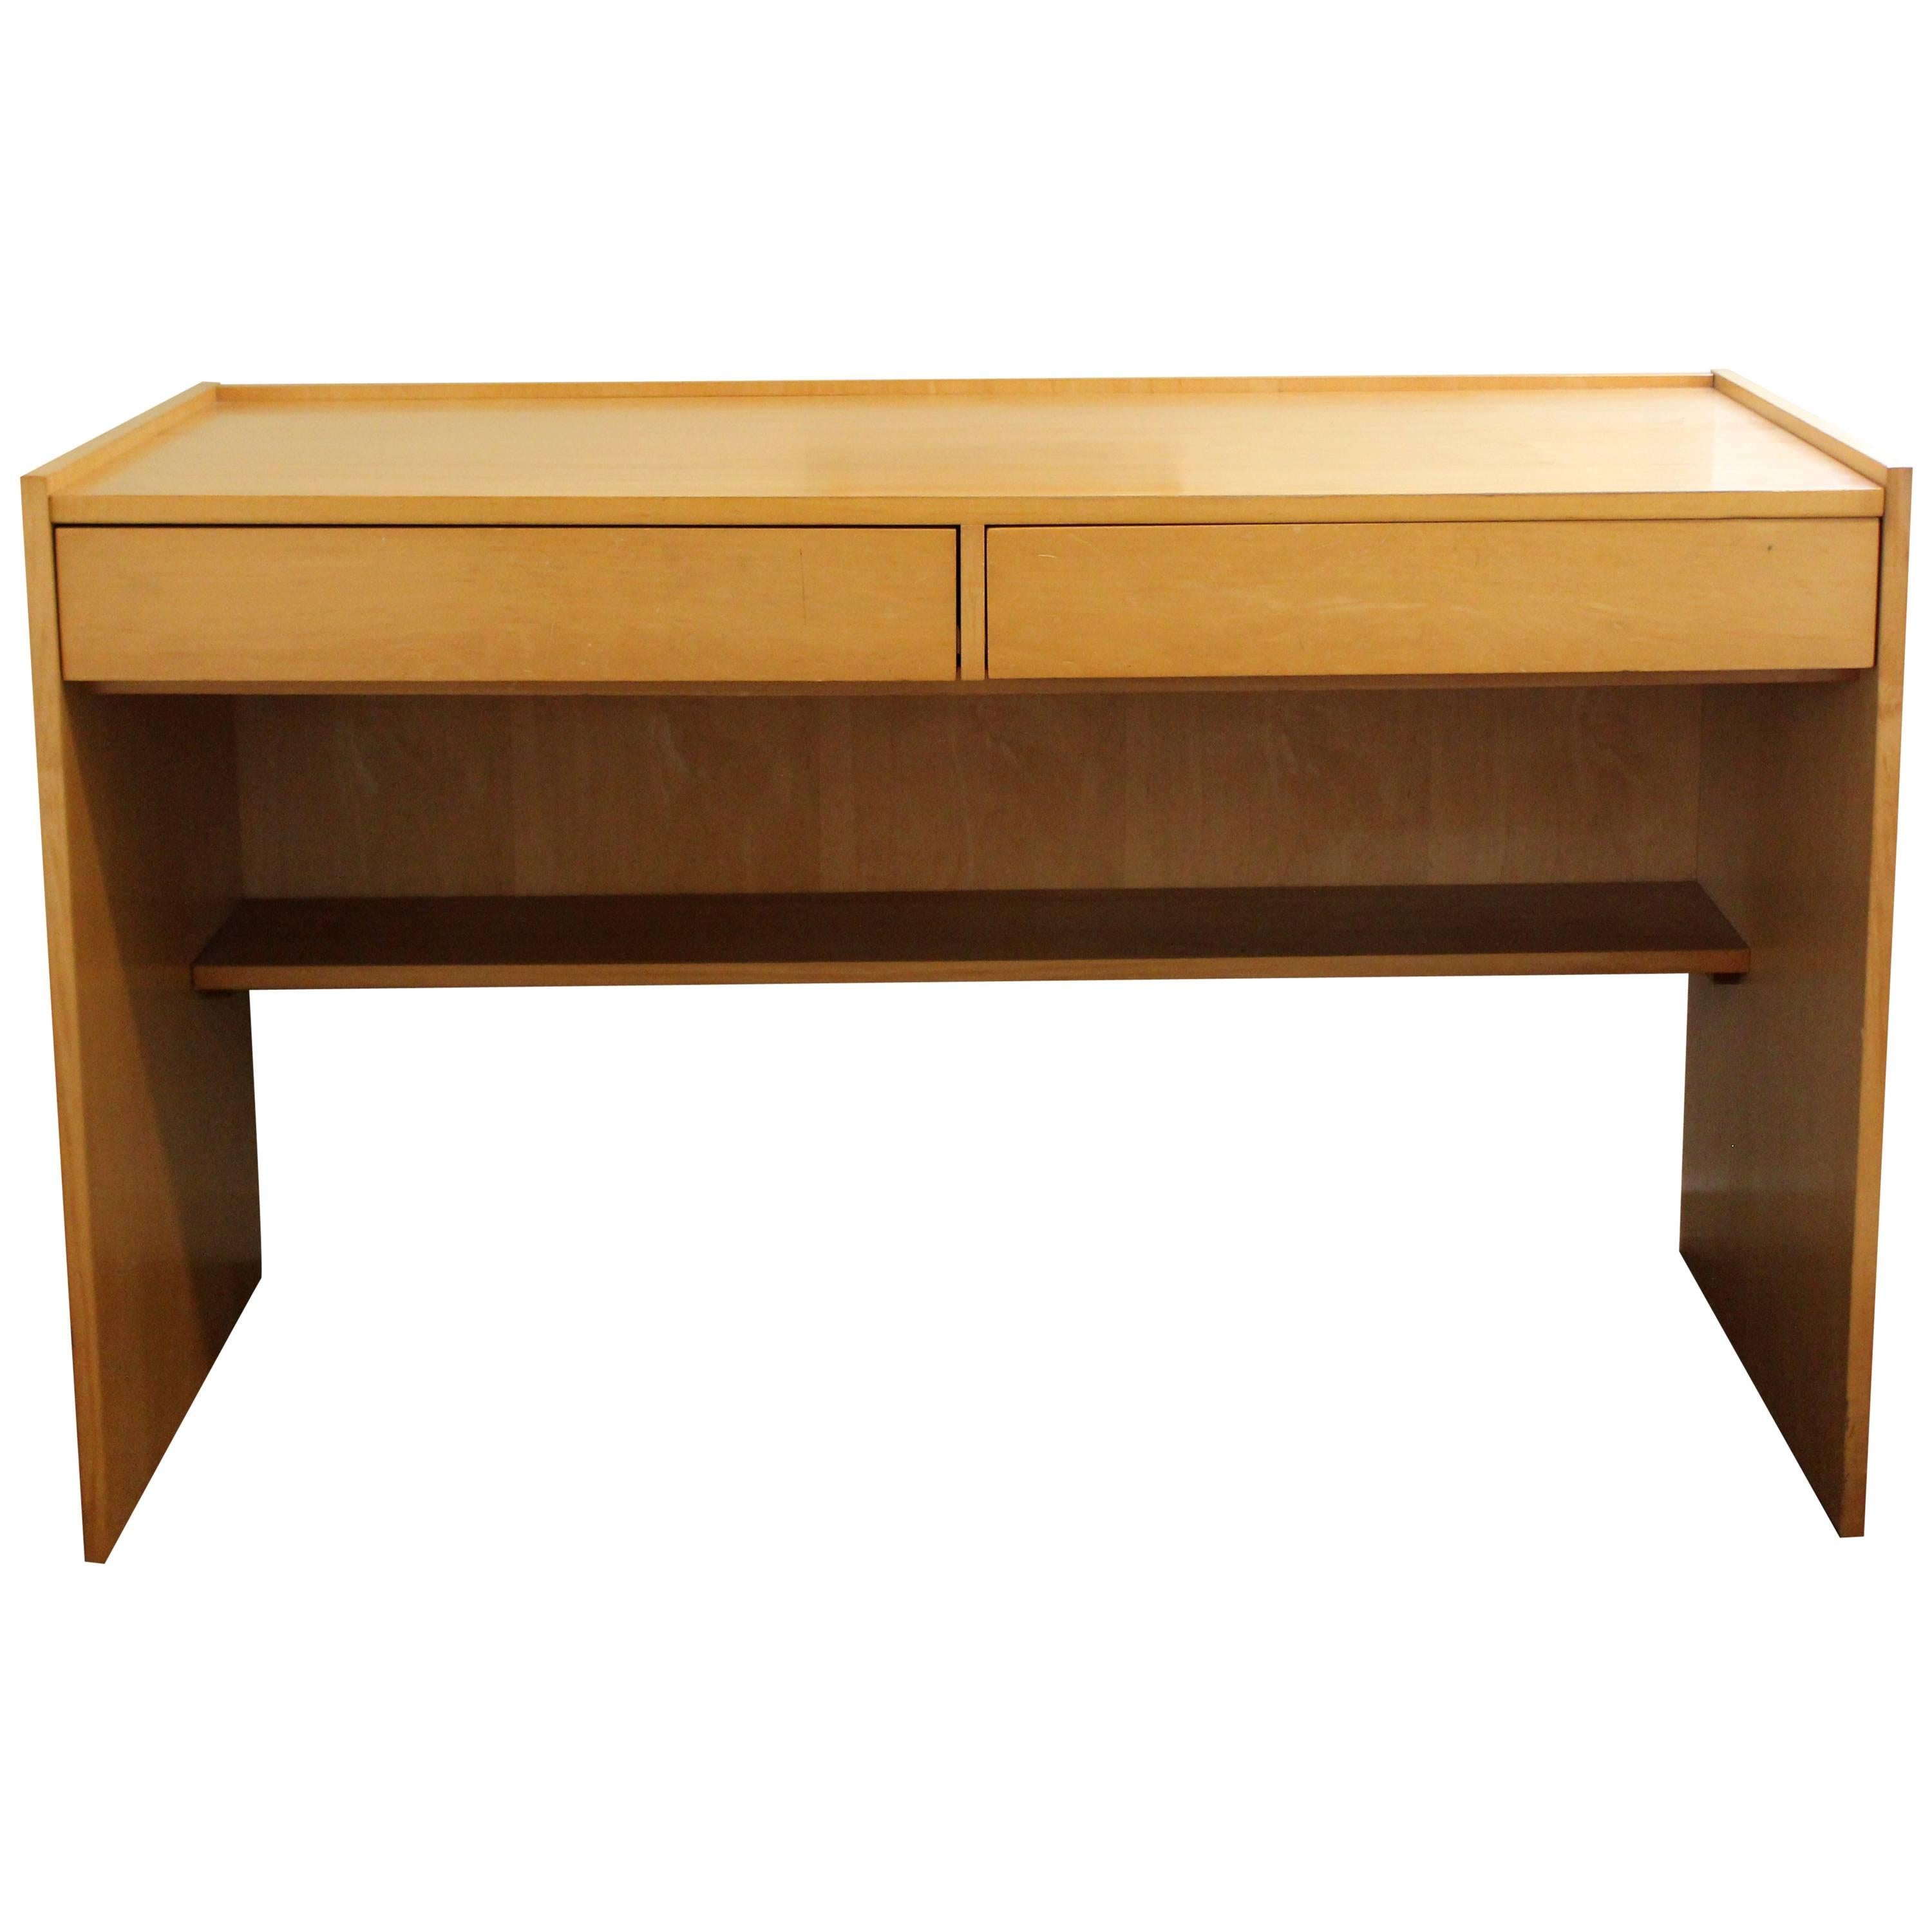 Mid-Century Modern Jack Cartwright for Founders Maple Desk Two-Drawer, 1960s